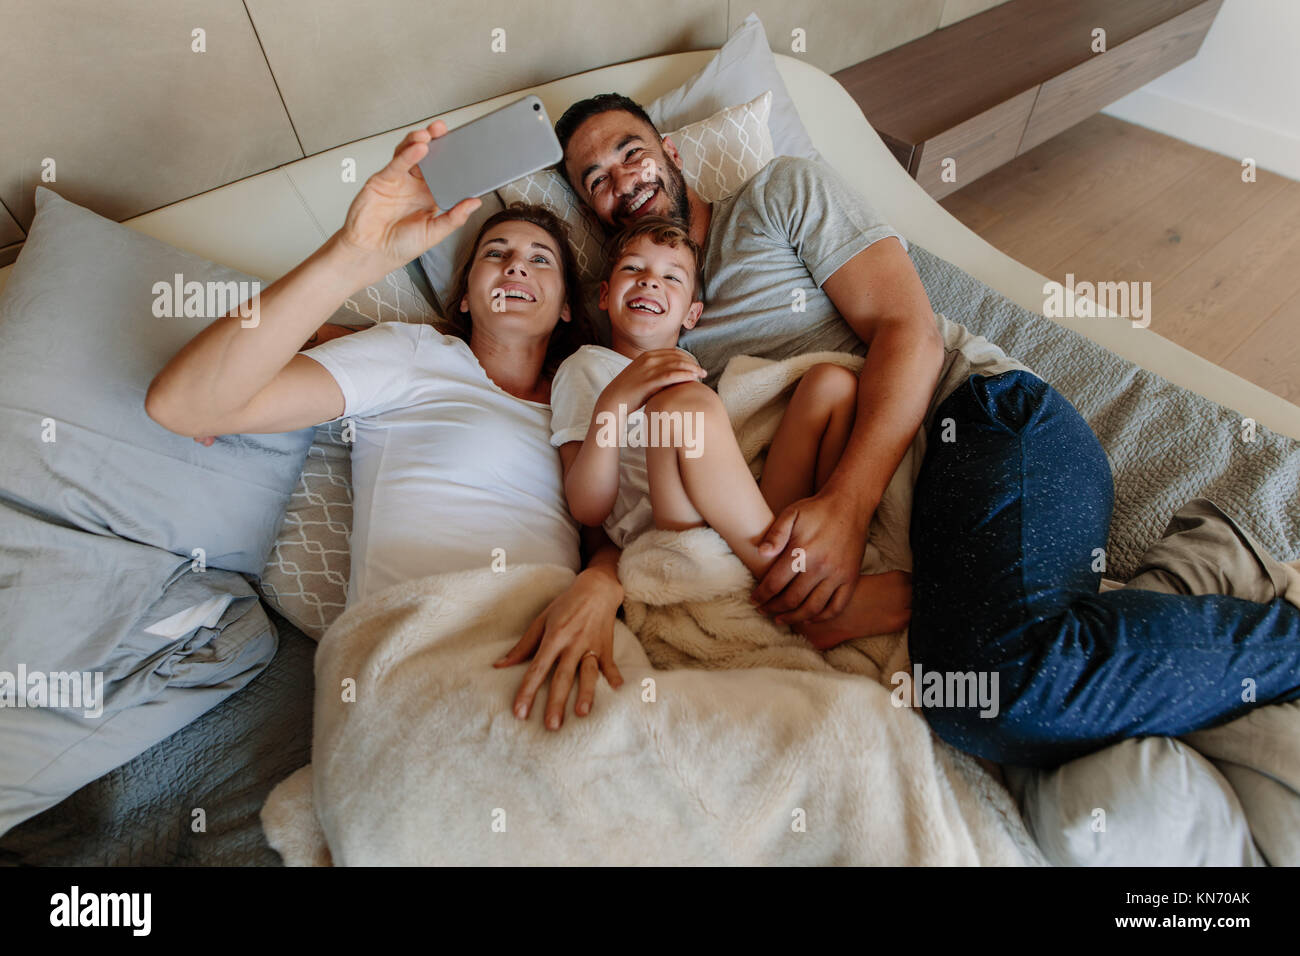 Family lying on bed and taking selfie at home. Happy young woman taking selfie with her family. Stock Photo